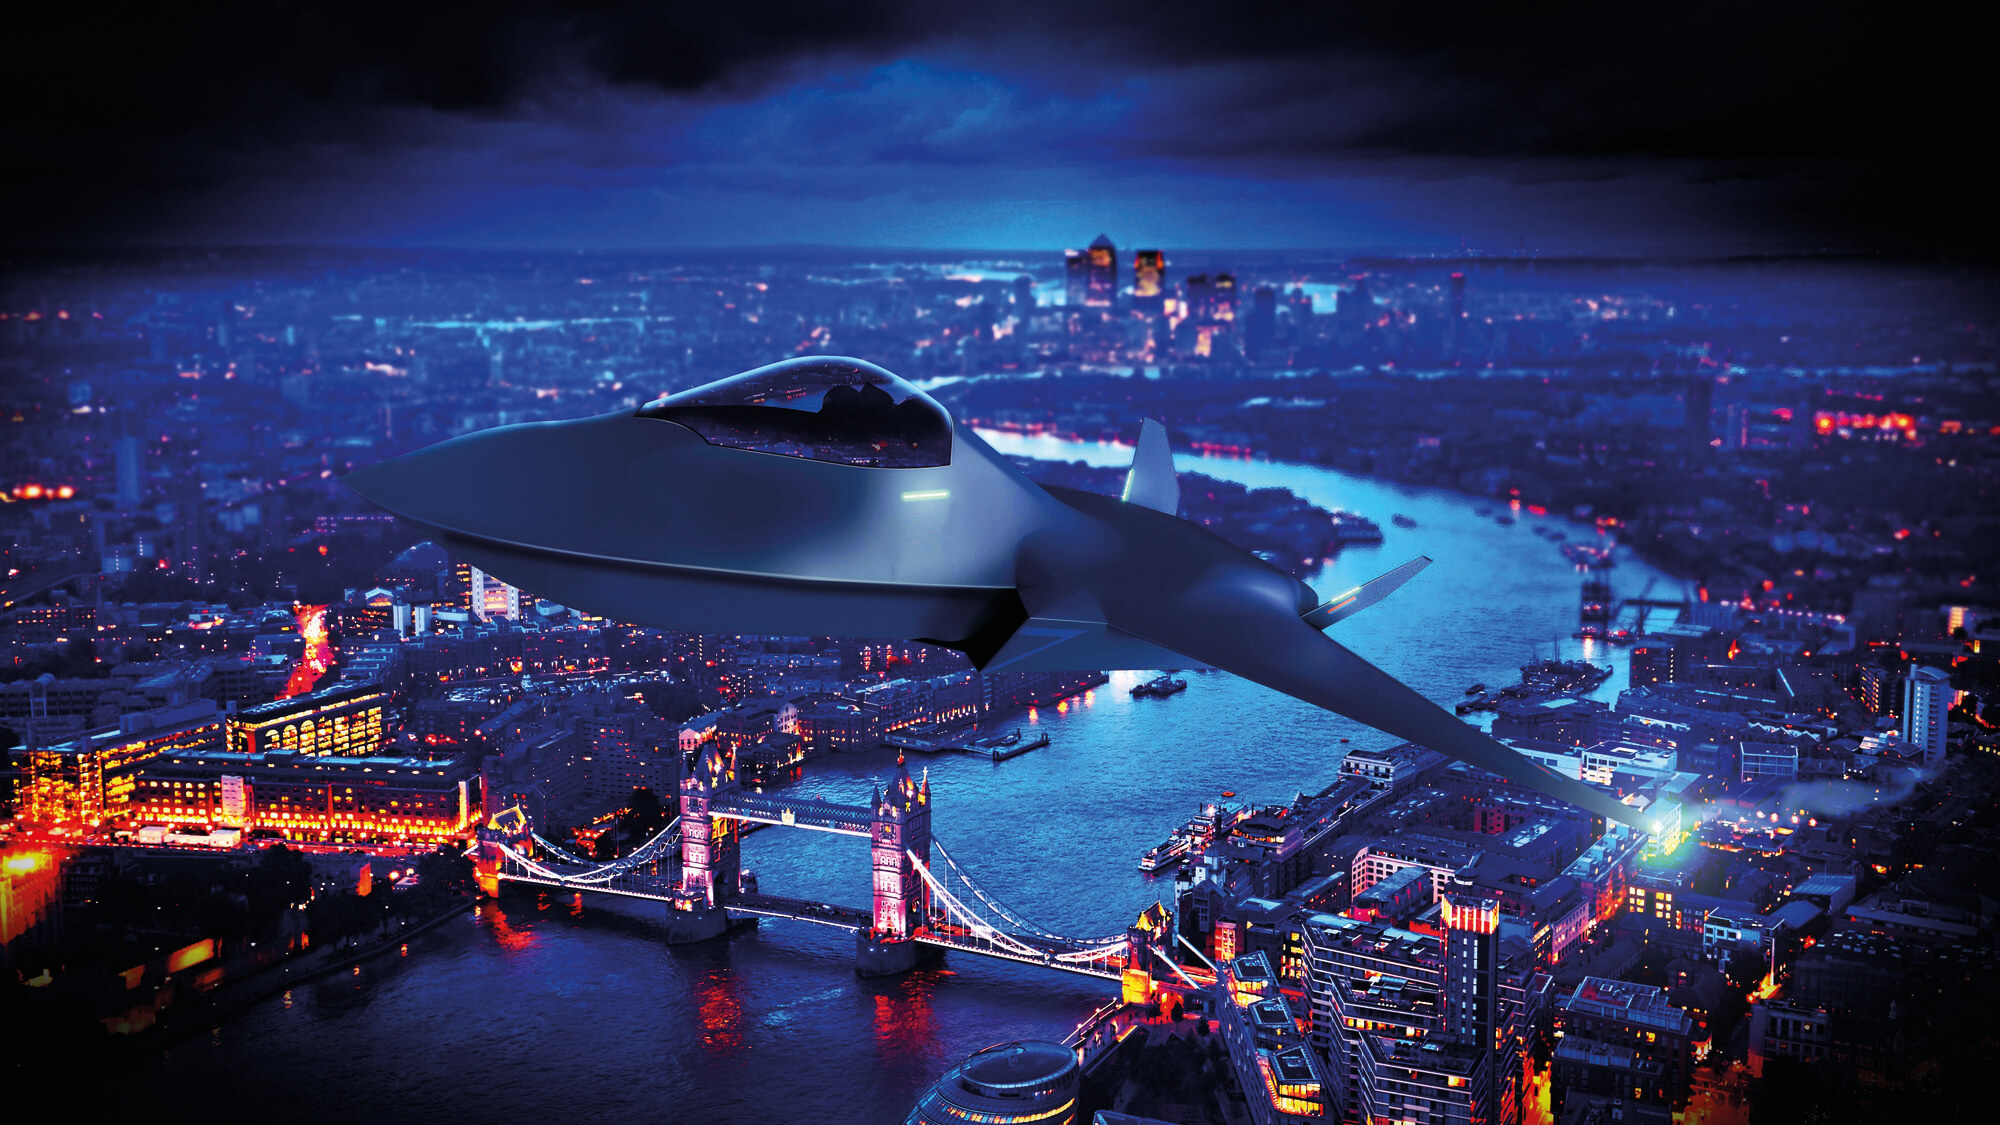 Image shows graphic of a Future Combat Air System flying over London at night.